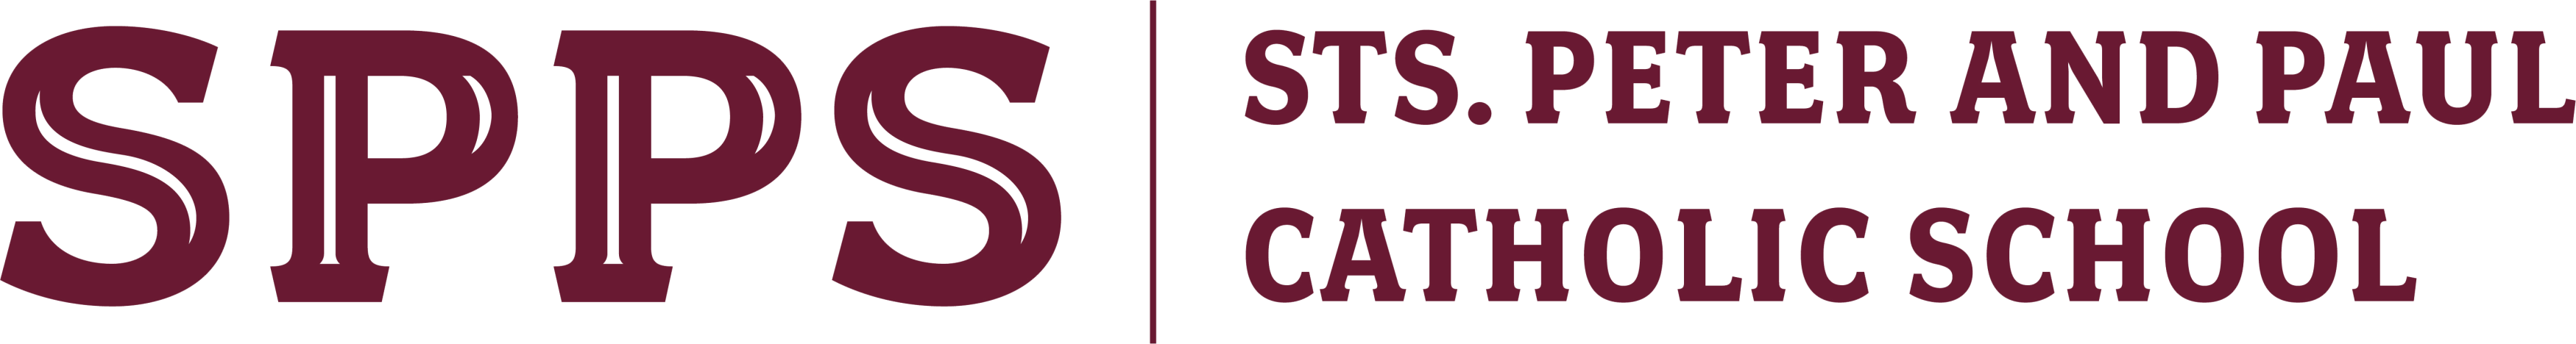 Logo for Sts Peter and Paul Catholic School